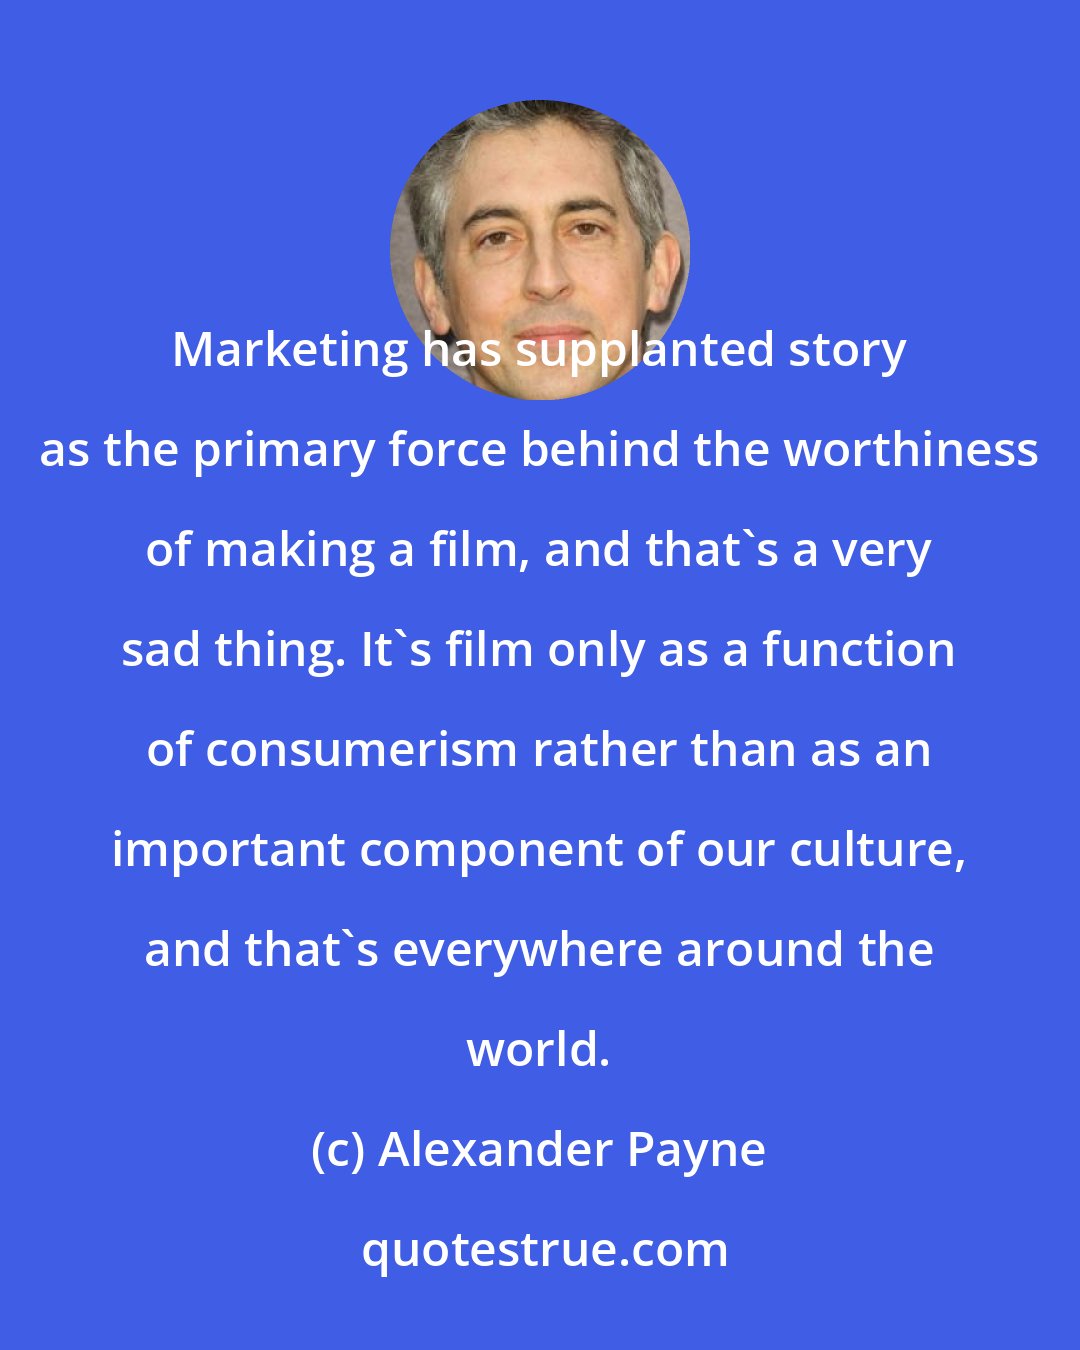 Alexander Payne: Marketing has supplanted story as the primary force behind the worthiness of making a film, and that's a very sad thing. It's film only as a function of consumerism rather than as an important component of our culture, and that's everywhere around the world.